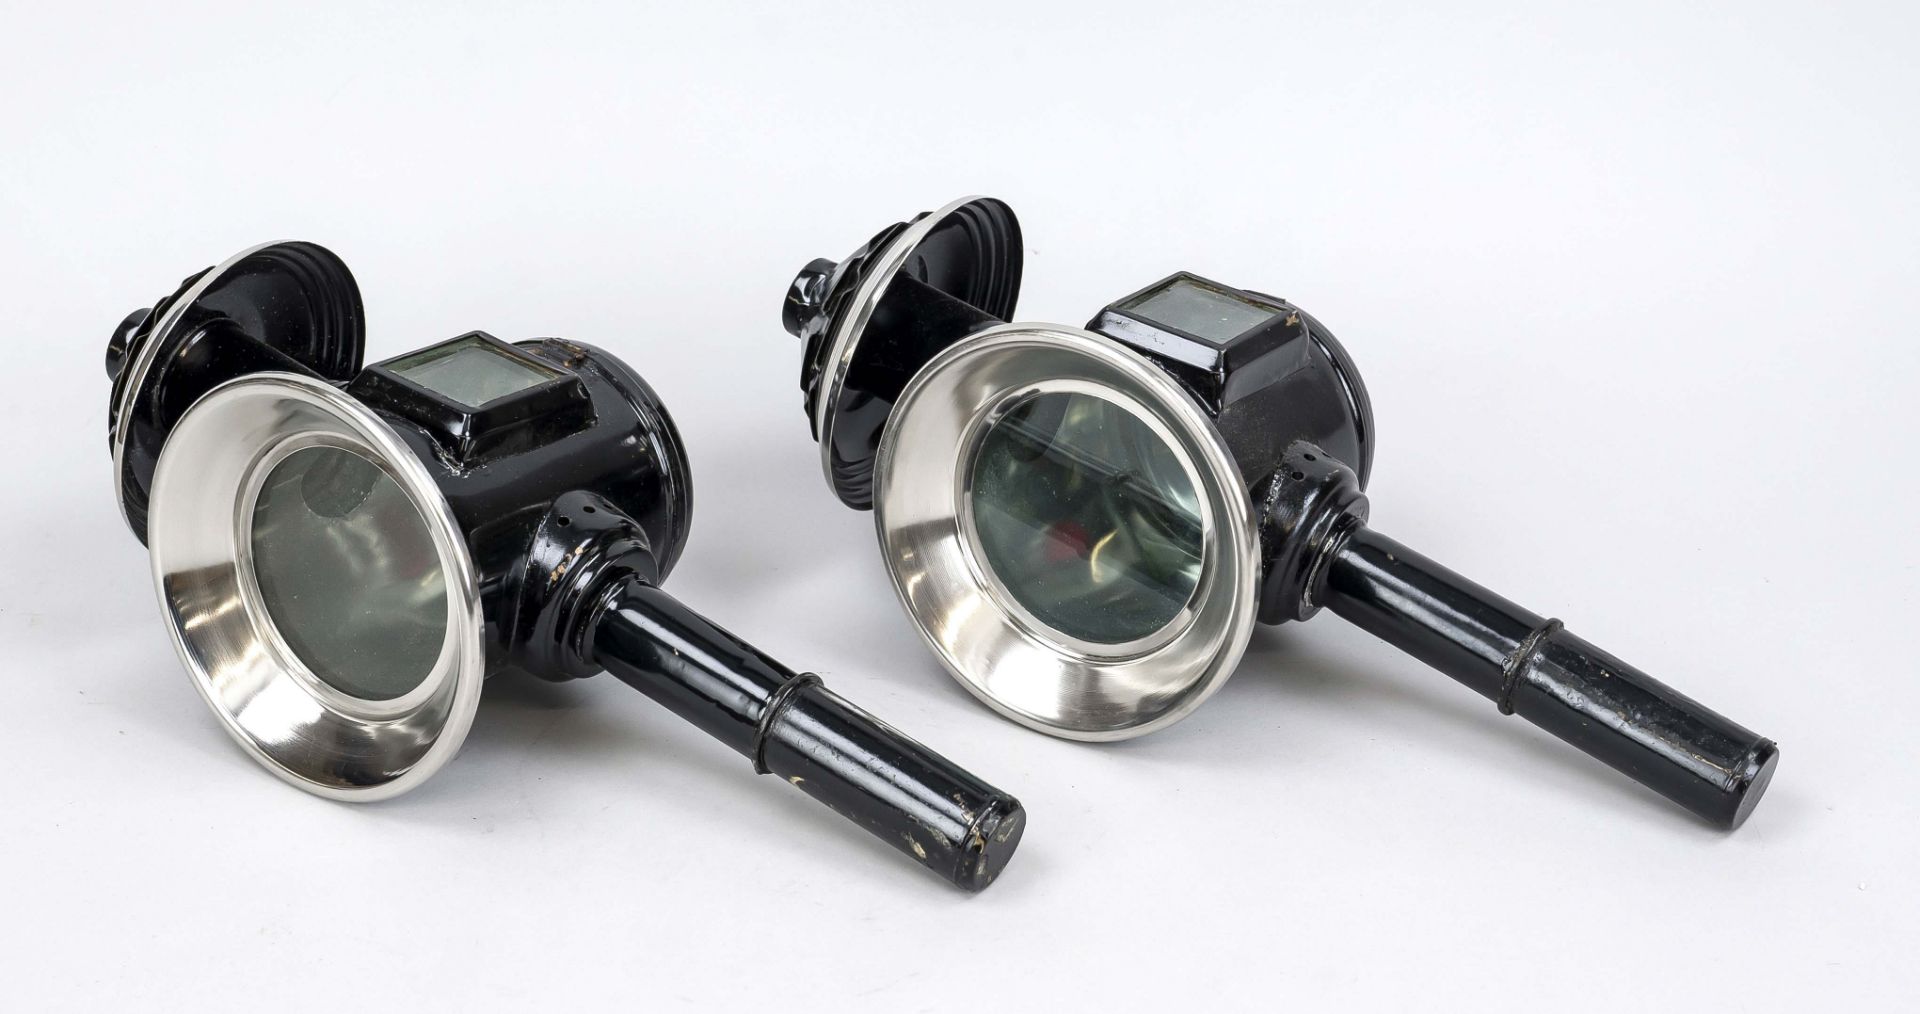 Pair of carriage lamps, 19th/20th century, black lacquered and chrome-plated metal body with glass